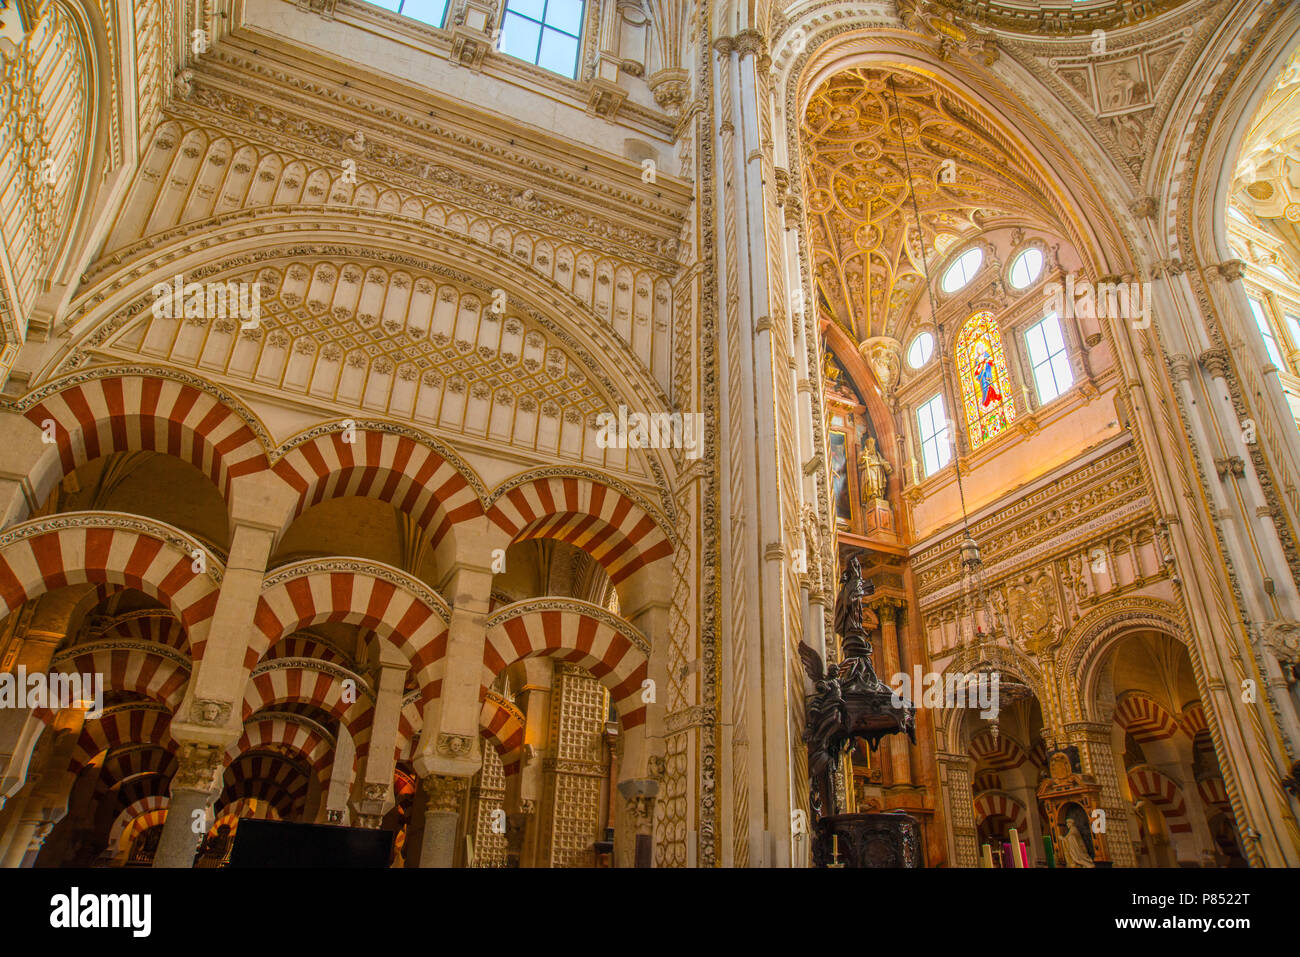 Mosque cathedral, indoor view. Cordoba, Spain. Stock Photo